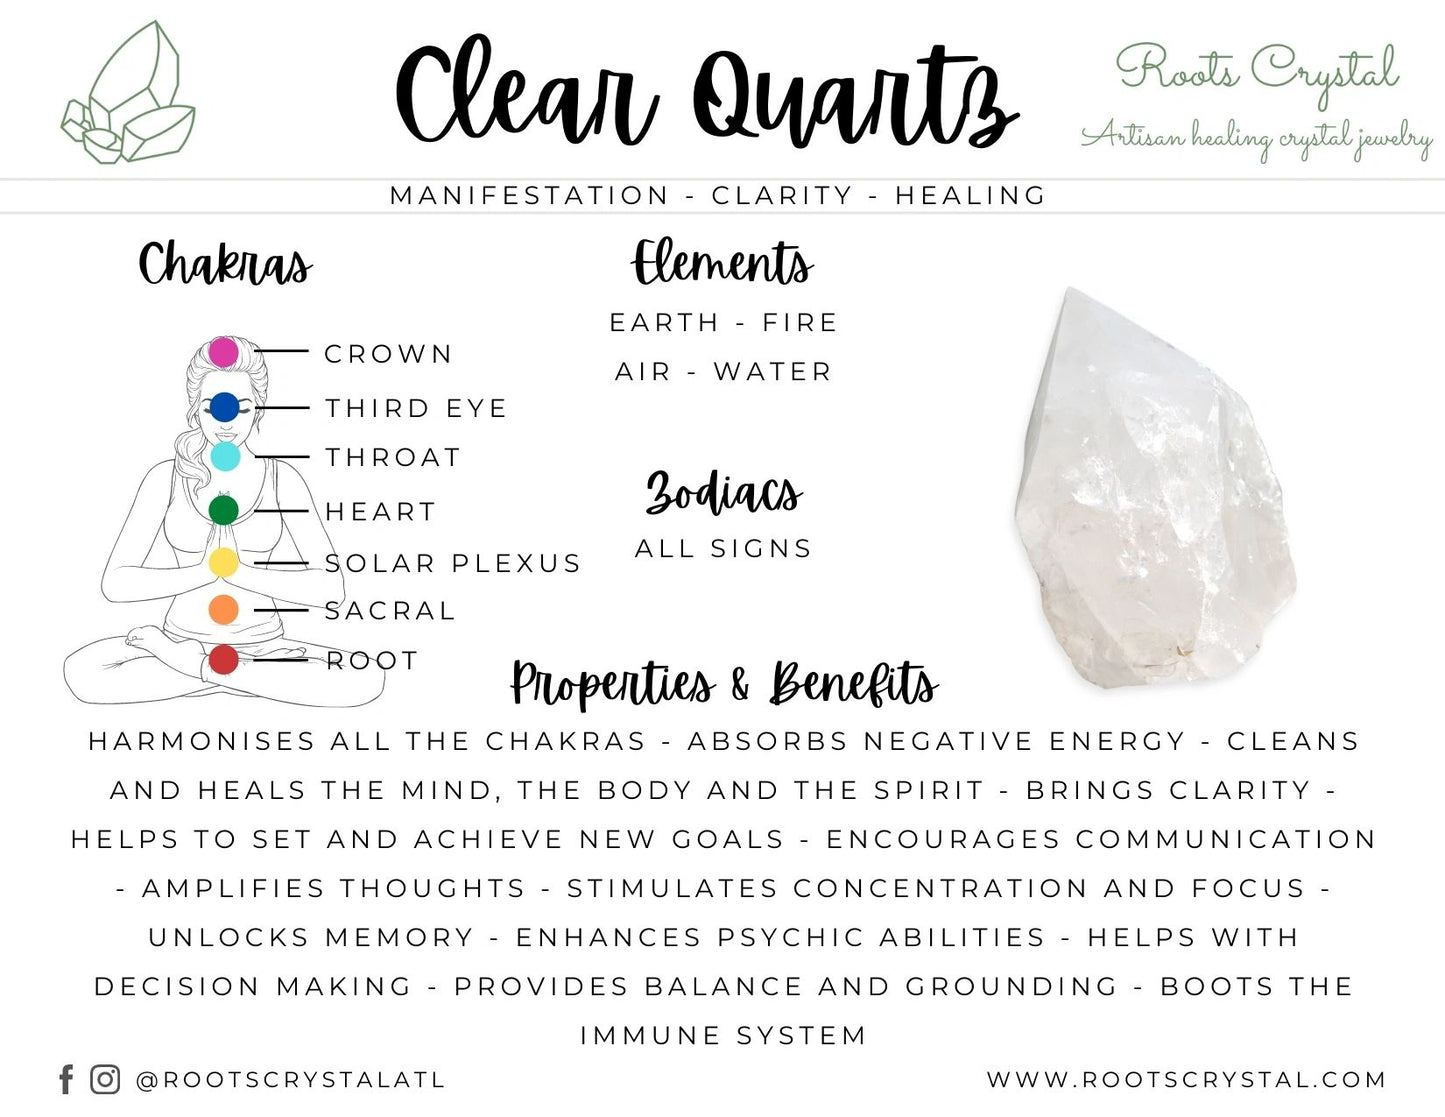 "Protection" Pack of Raw Crystals: Tourmaline, Amethyst, Citrine, Rose Quartz, Clear Quartz | Easily carry in your pocket